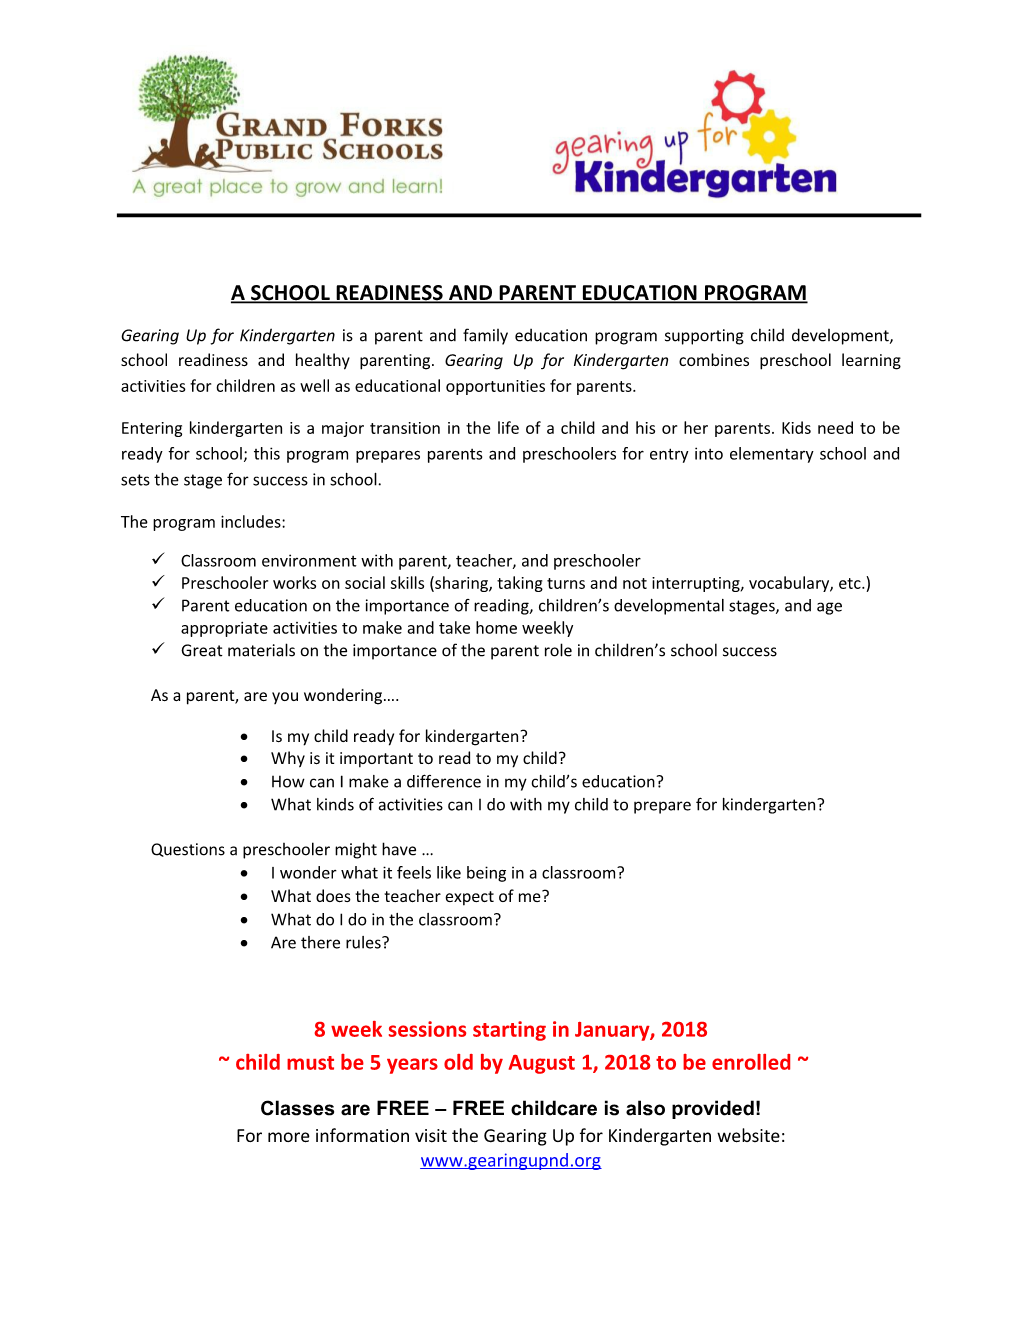 A School Readiness and Parent Education Program